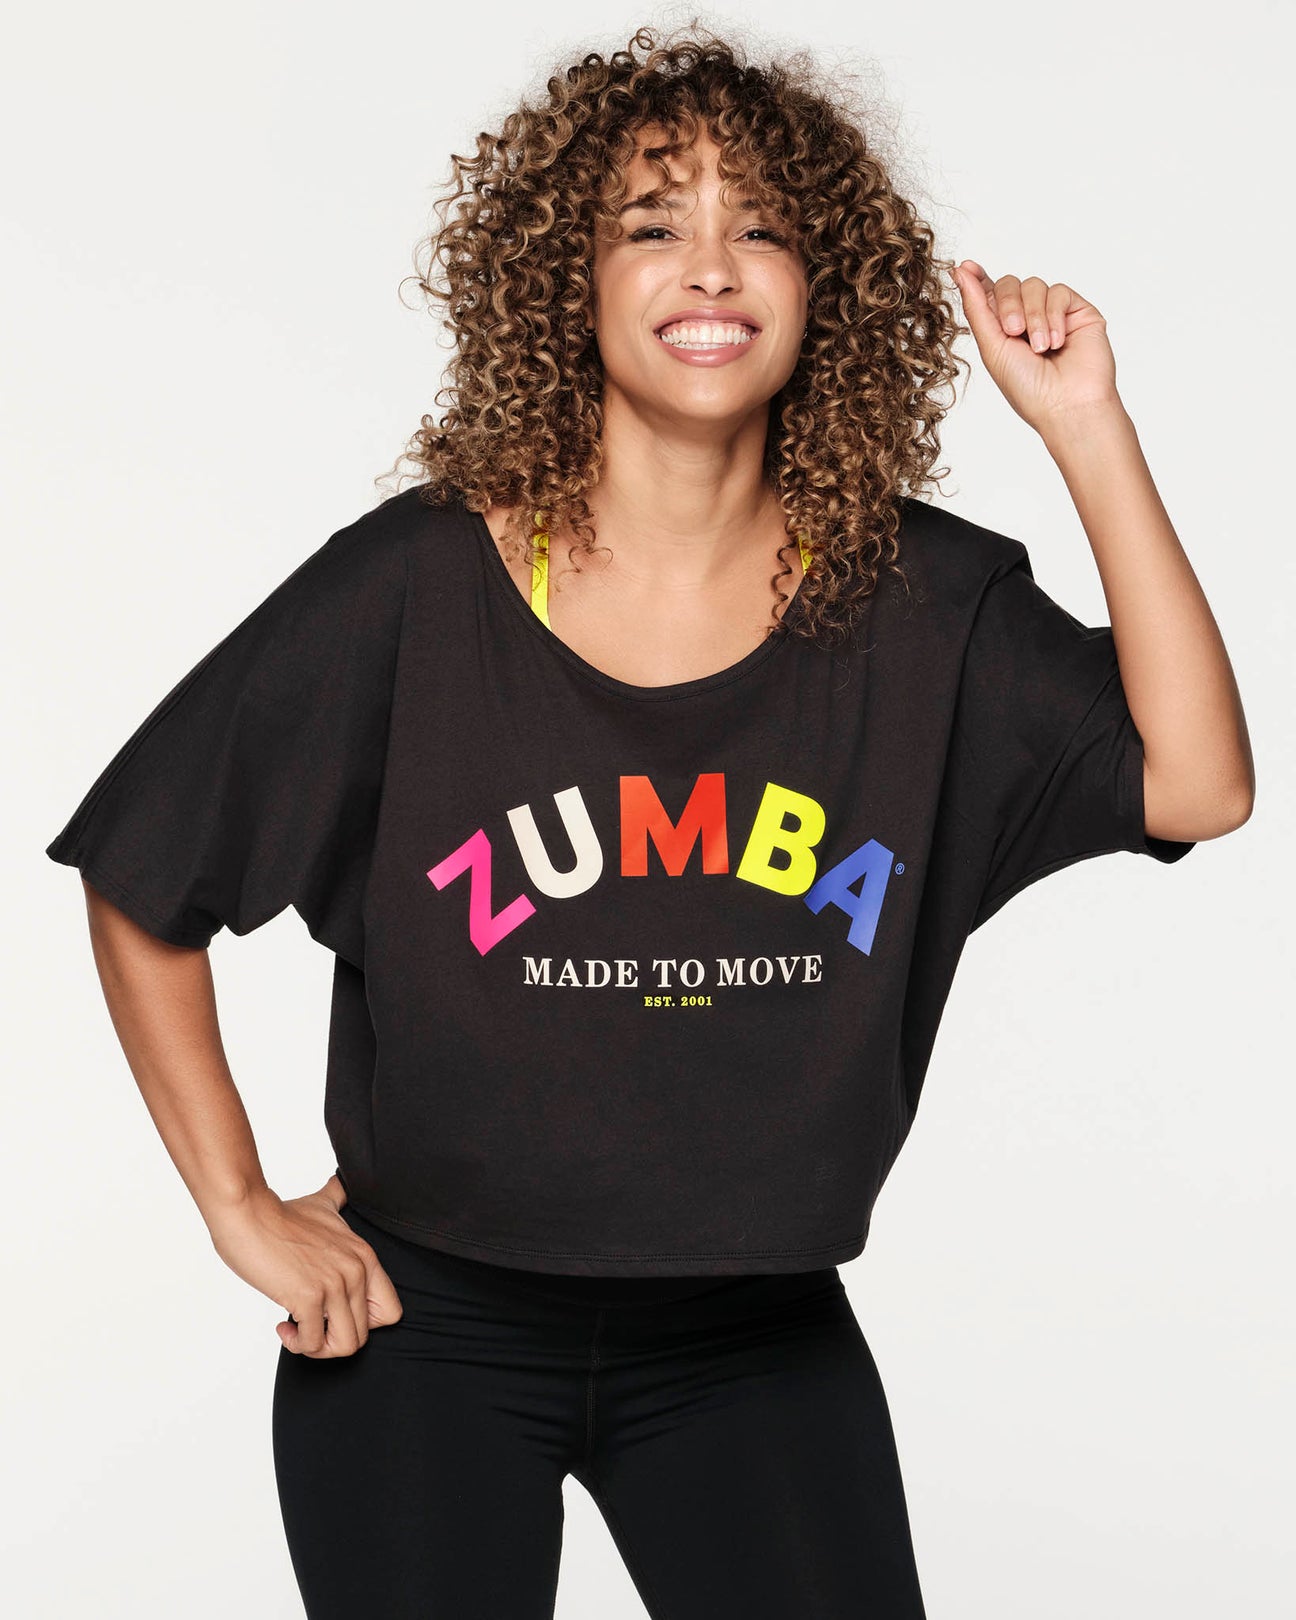 Nueva Llegada Ropa Mujer Zumba in motion top Tee z1t00 0100